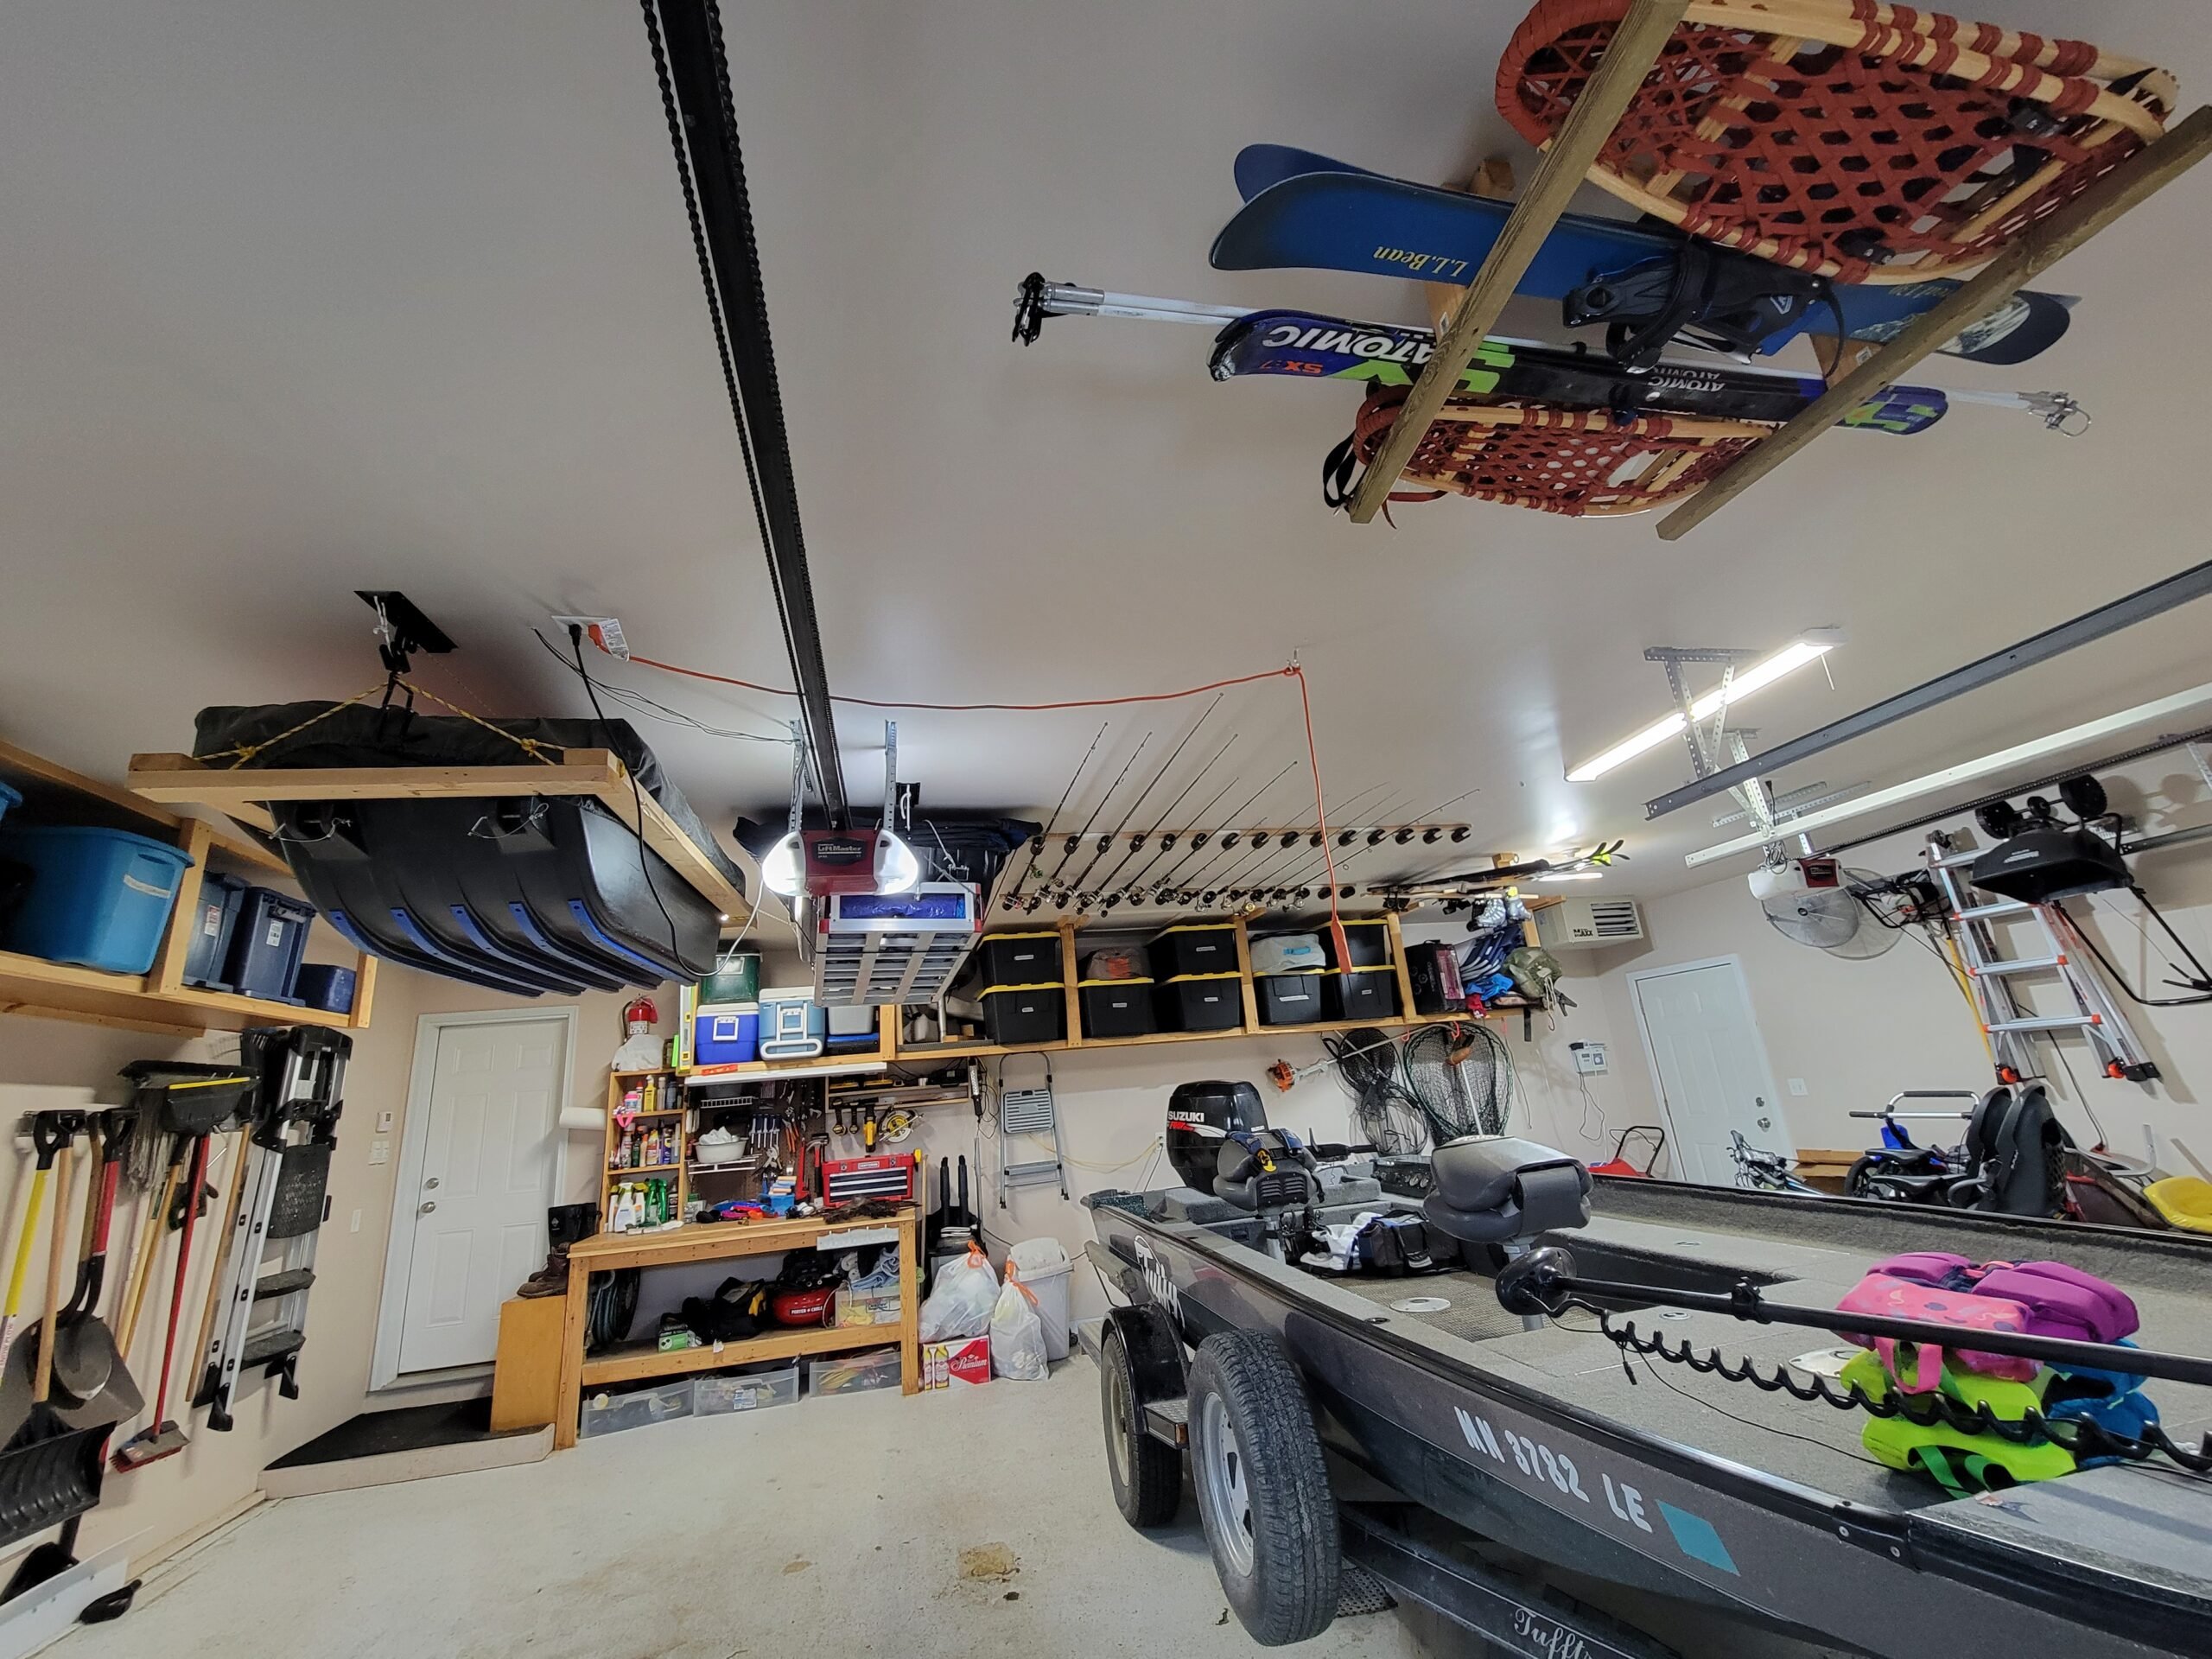 Storing fishing rods in the garage - General Discussion Forum - General  Discussion Forum